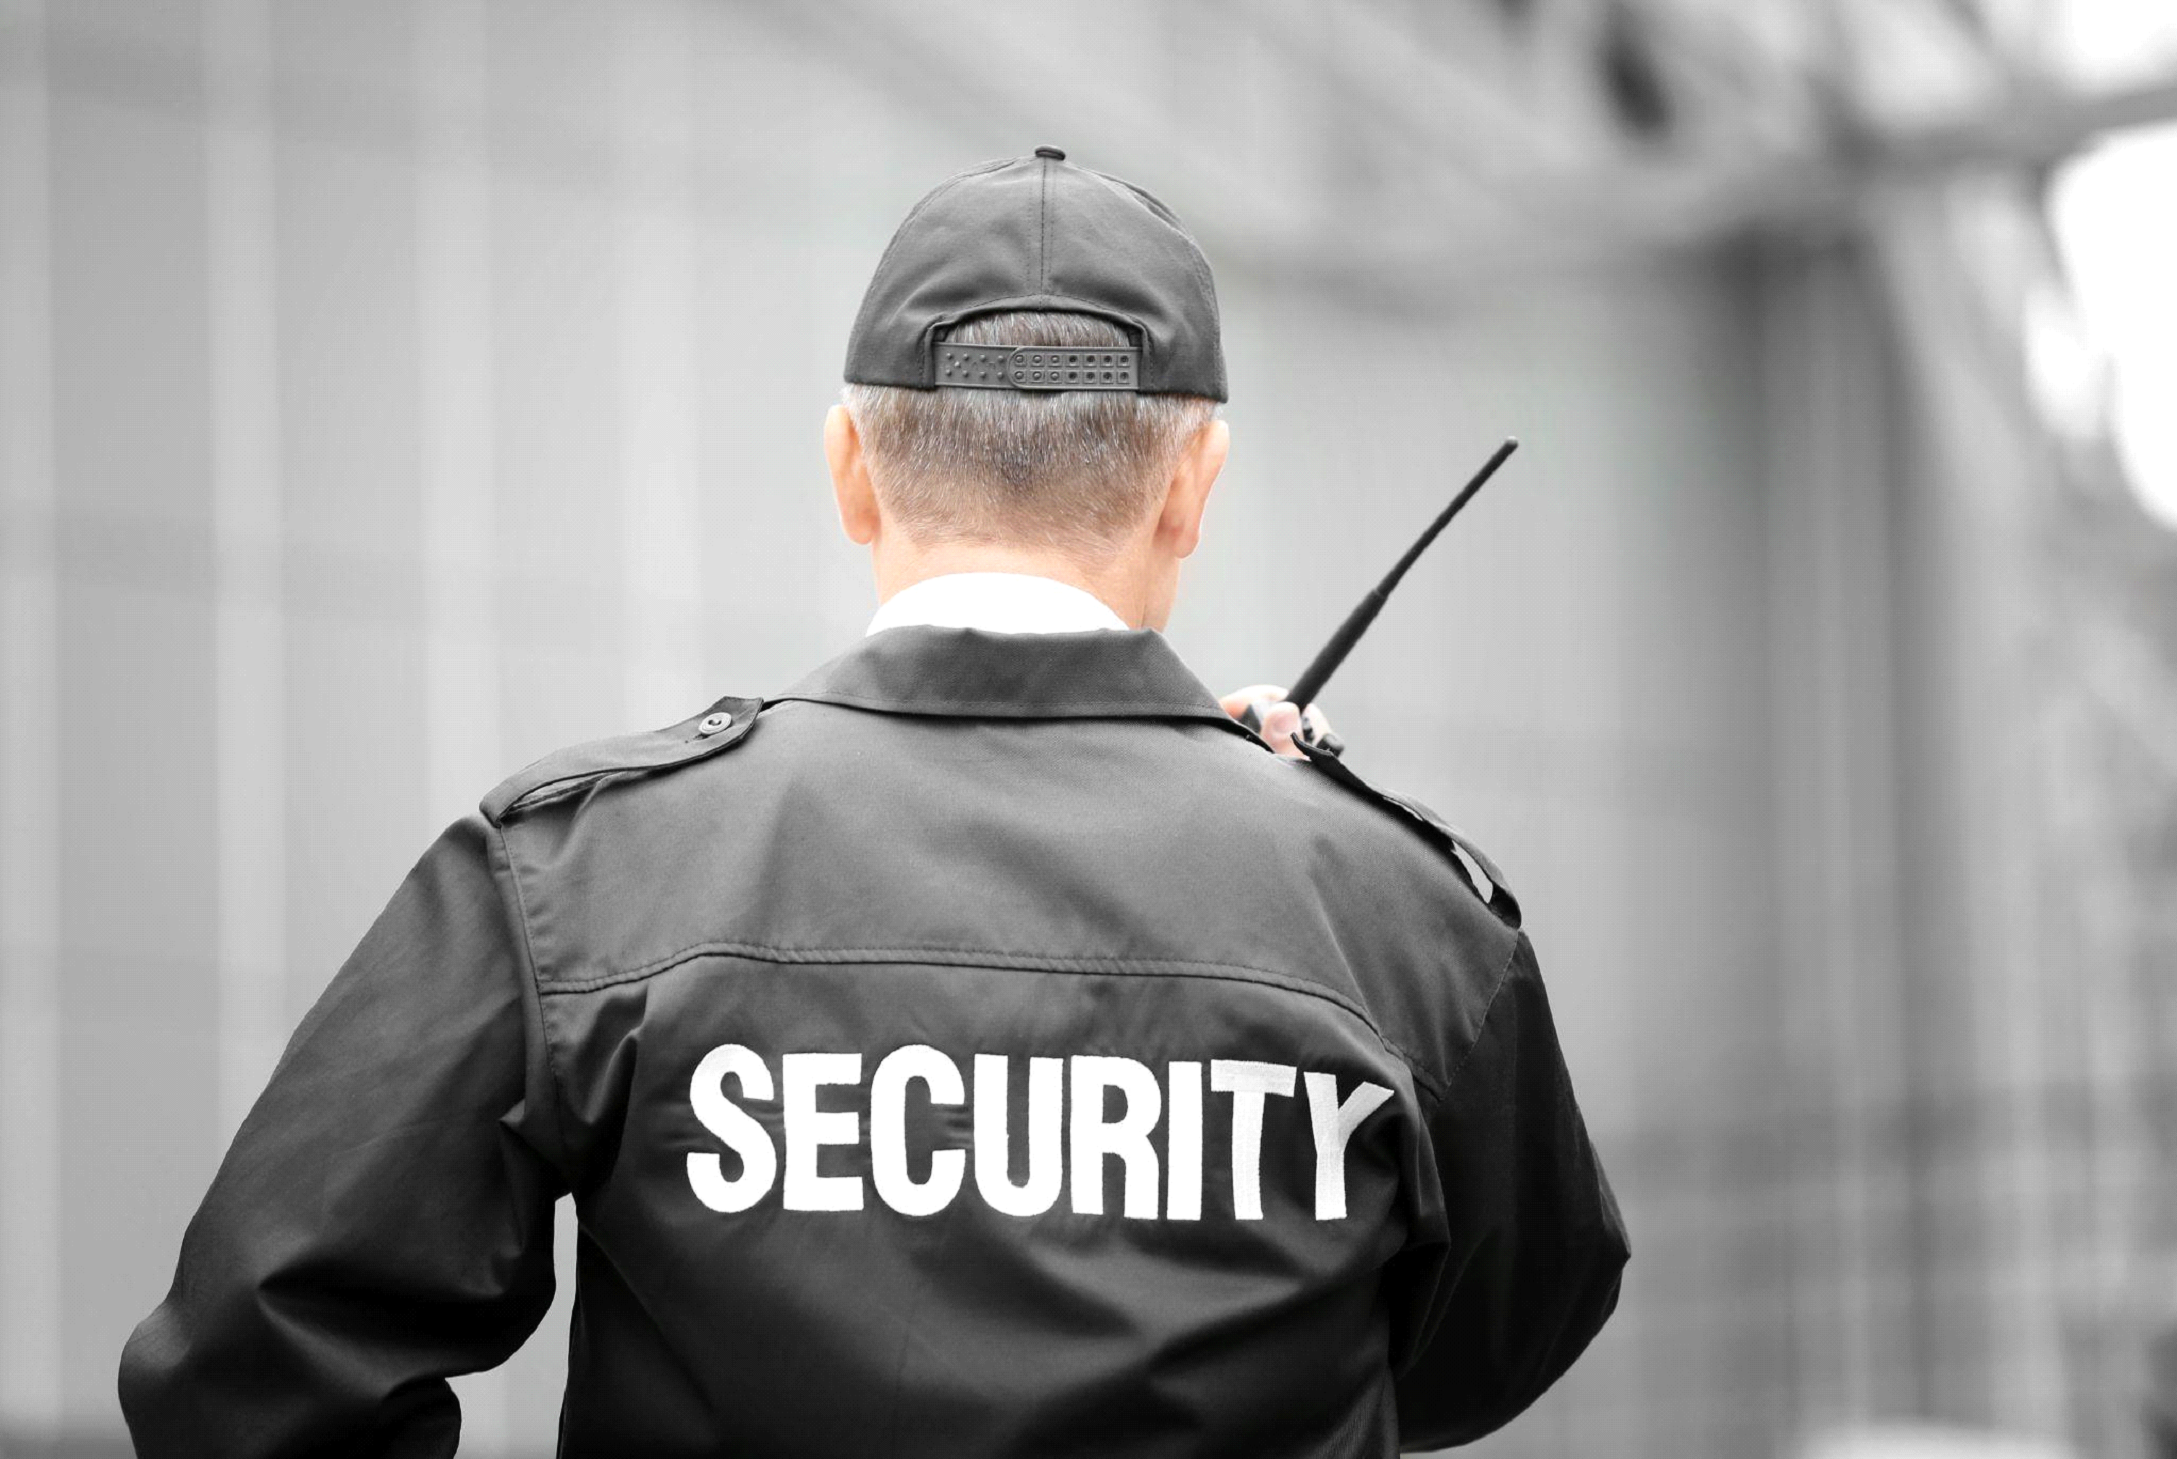 trusted security firm in Wildomar & Canyon Lake, California.